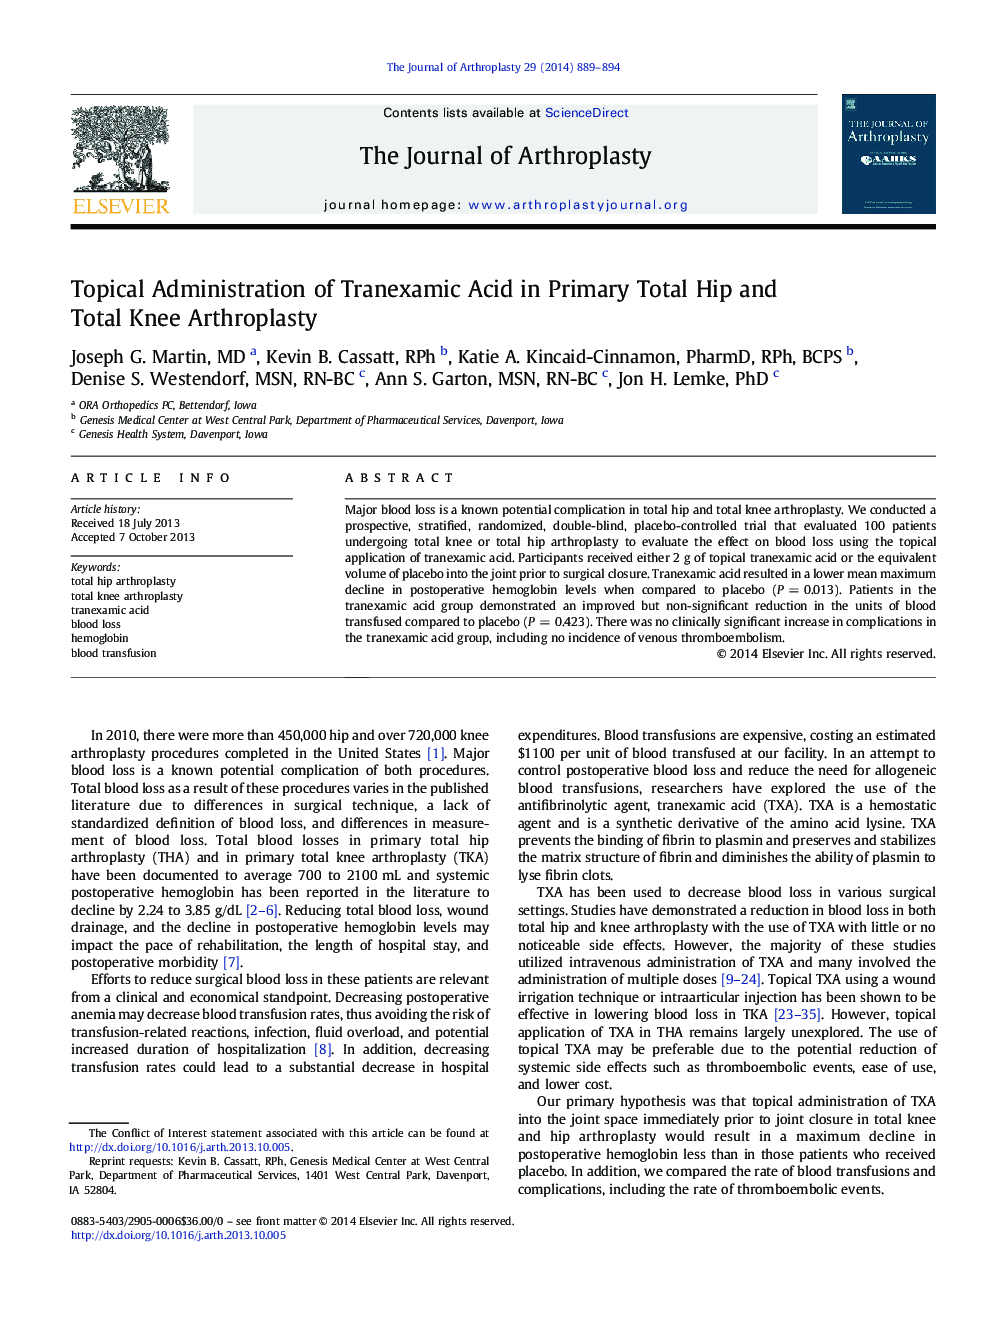 Topical Administration of Tranexamic Acid in Primary Total Hip and Total Knee Arthroplasty